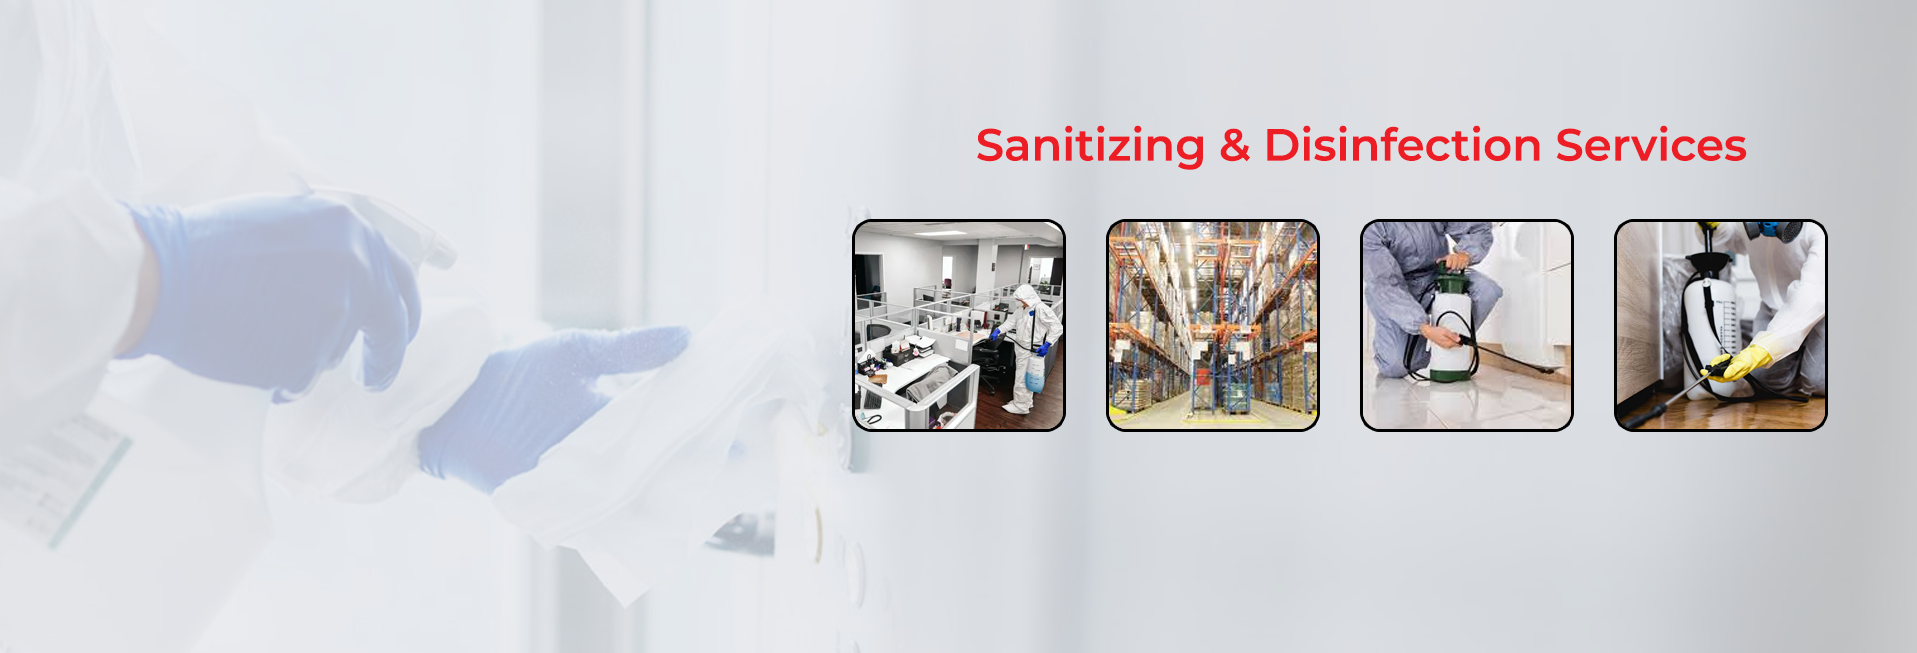 Sanitization & Disinfection Services